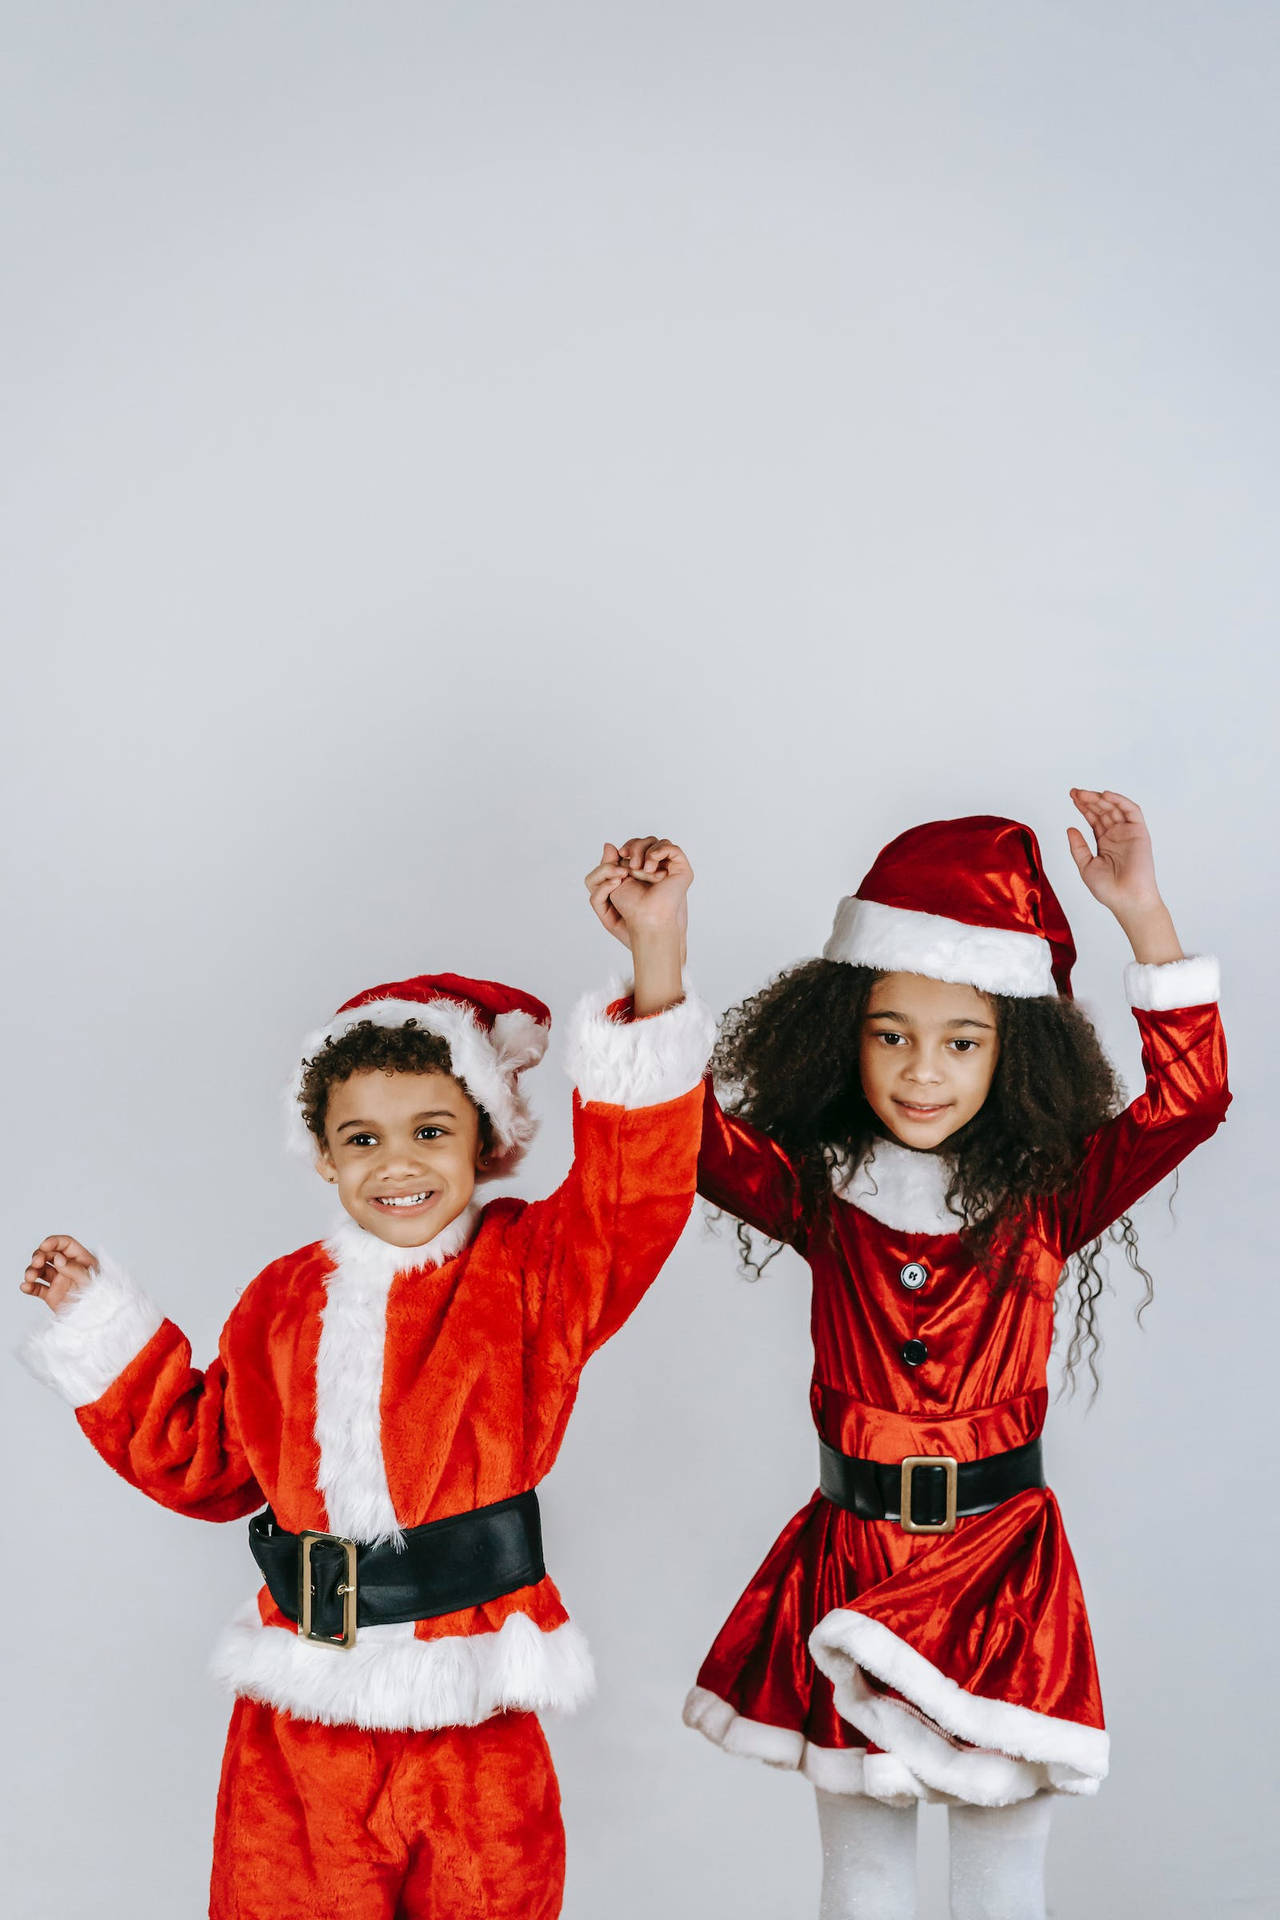 Kids In Santa Outfit Funny Christmas Wallpaper